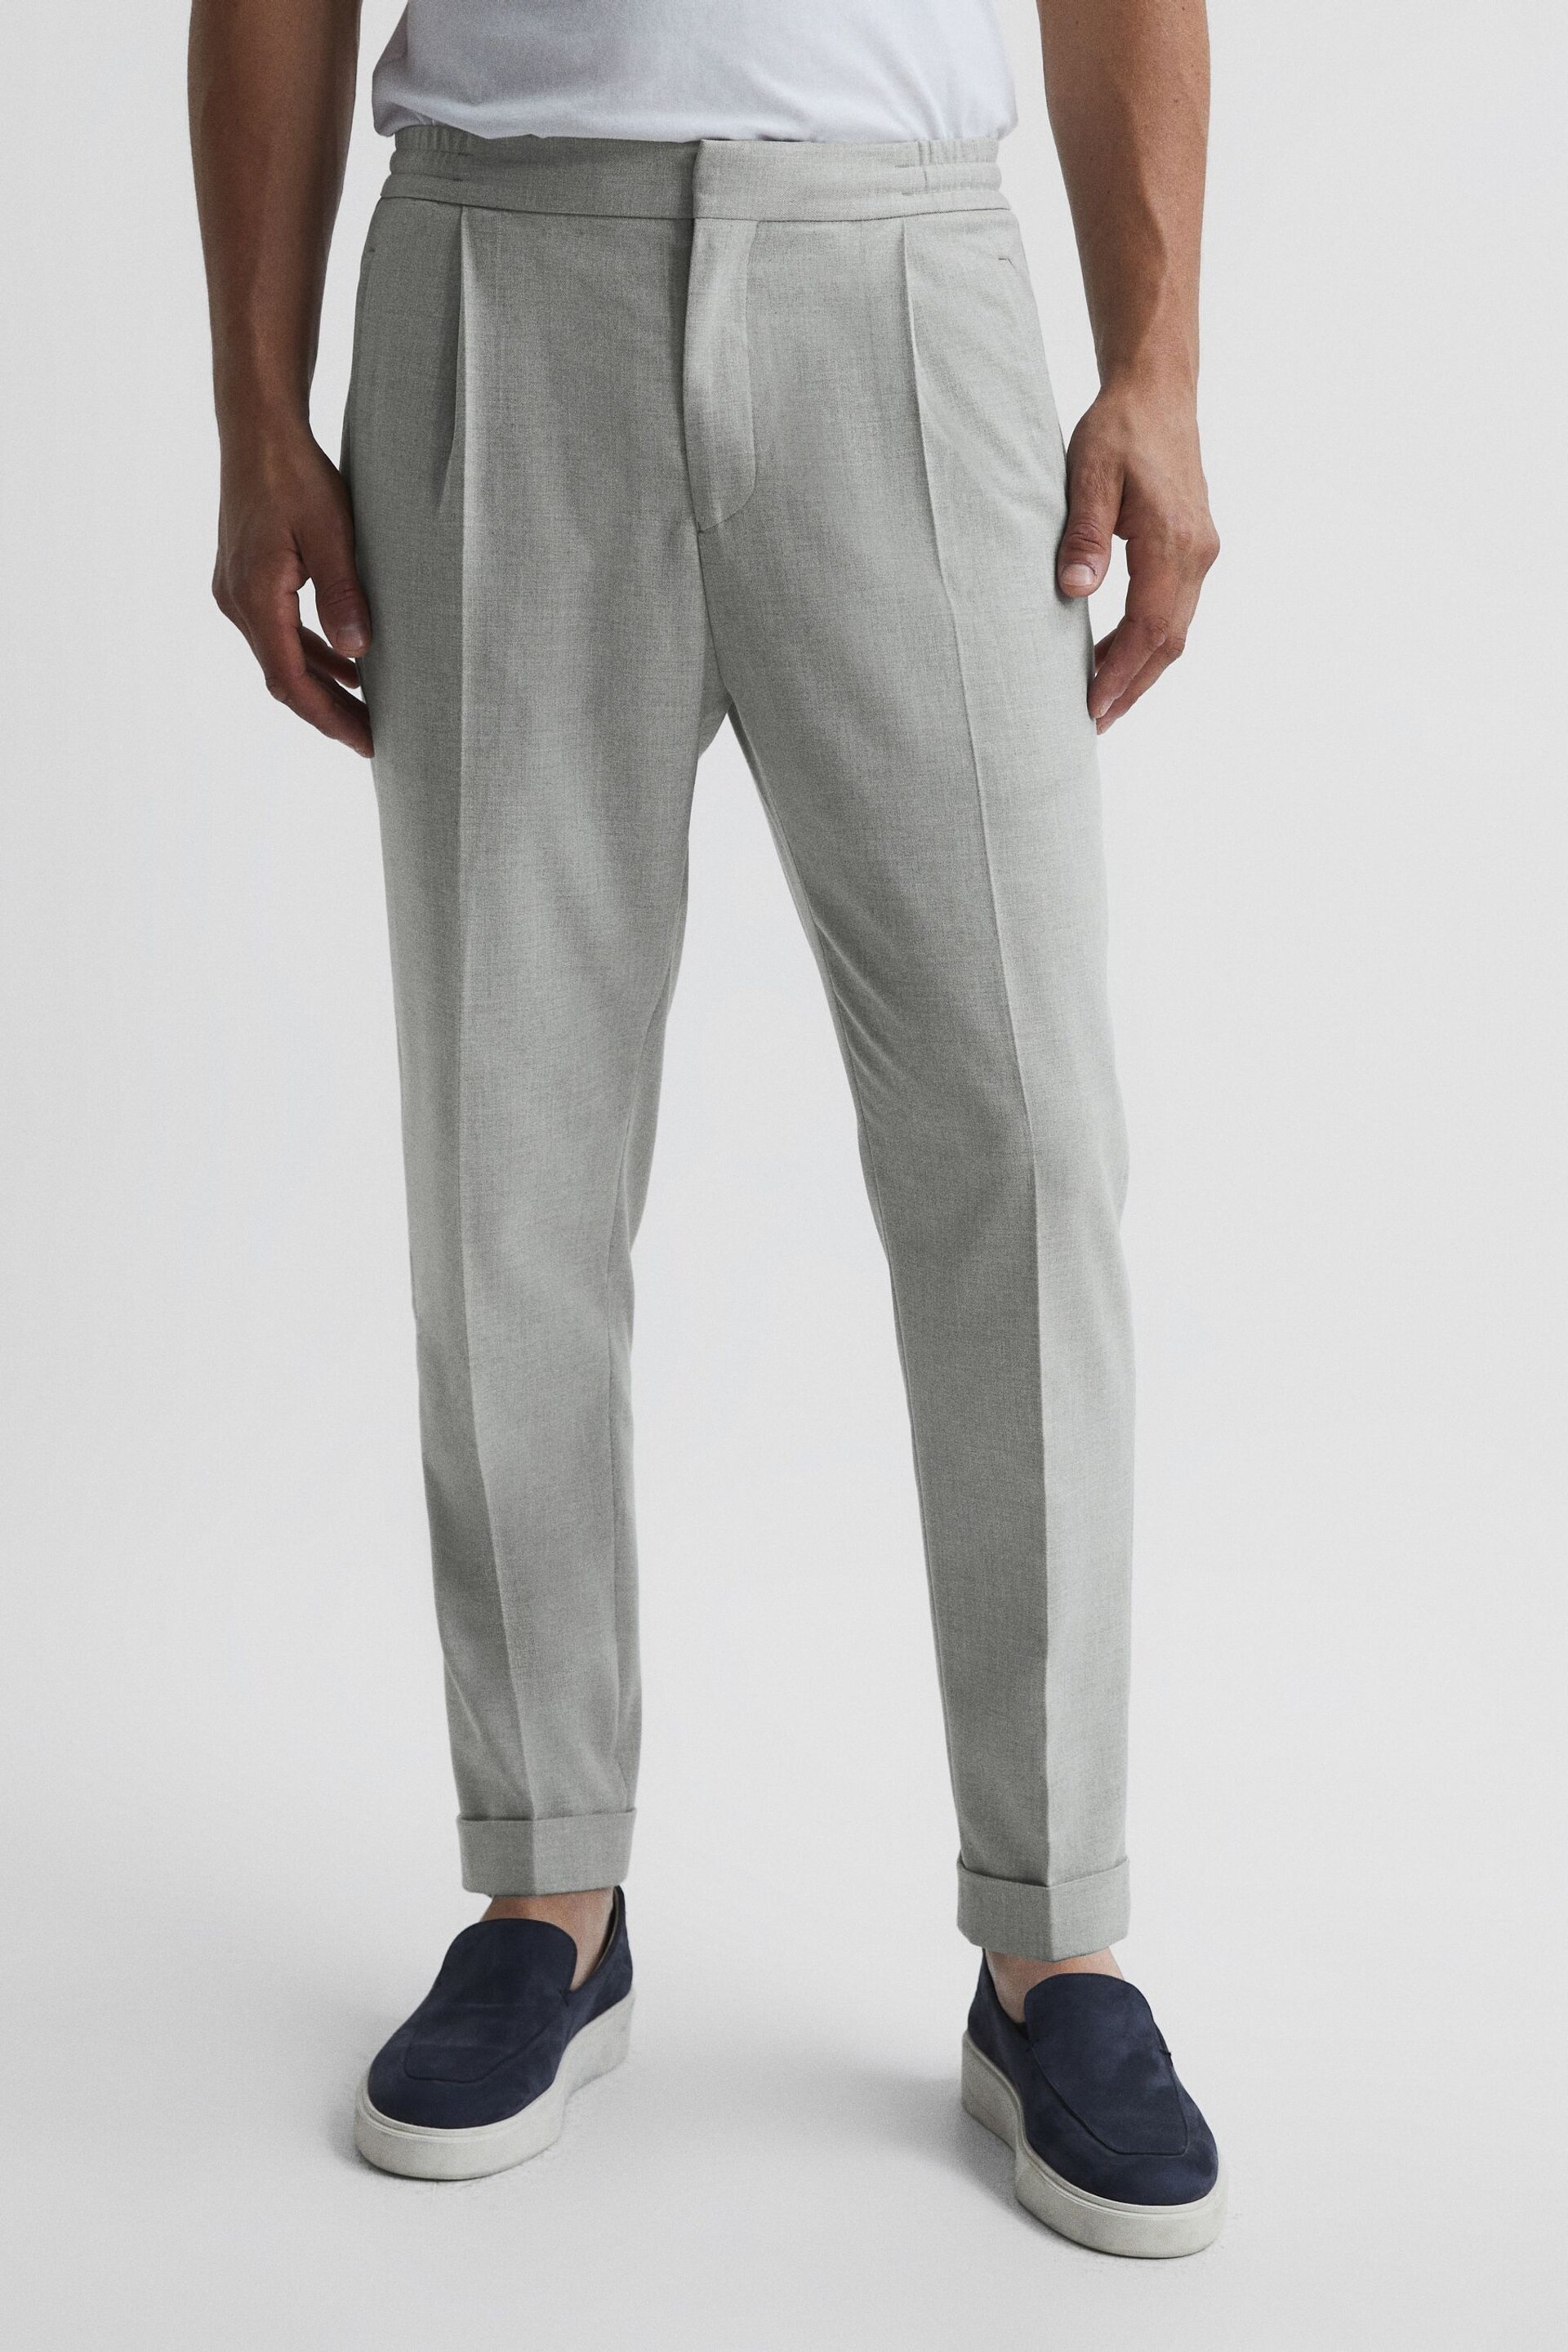 Reiss Soft Grey Brighton Relaxed Drawstring Trousers with Turn-Ups - Image 1 of 5